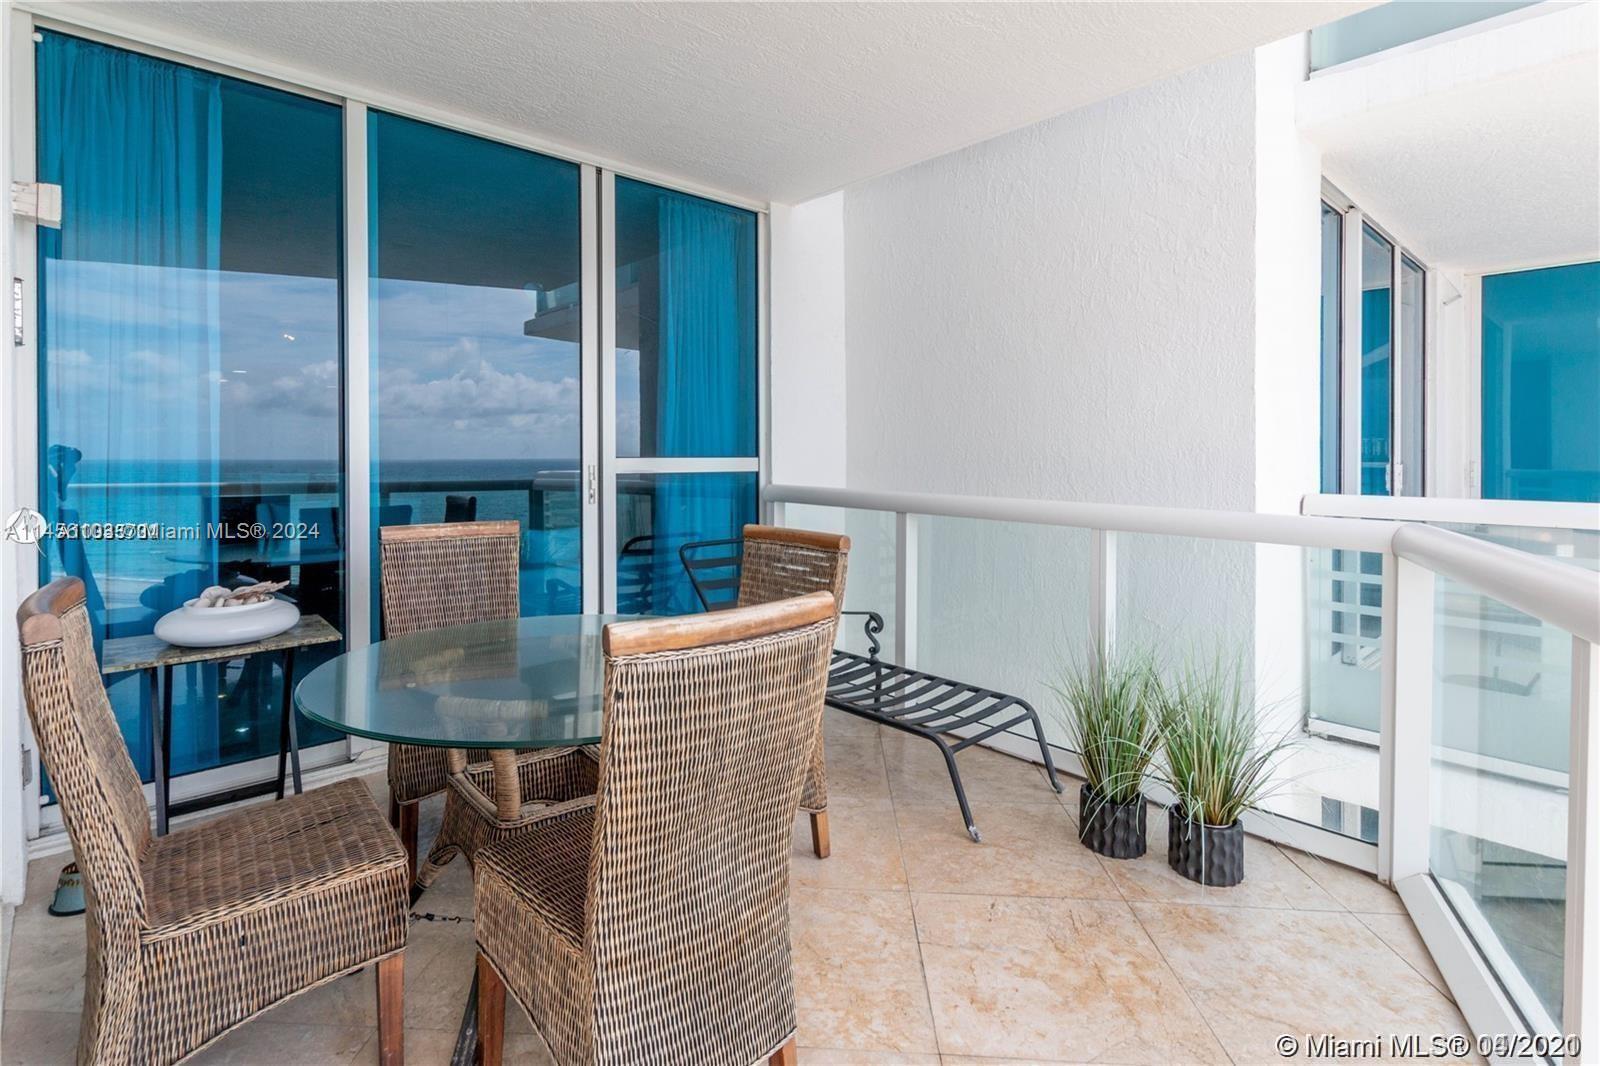 Great vacational home, enjoy in this amazing 3 bedrooms, 3 baths right on the ocean.